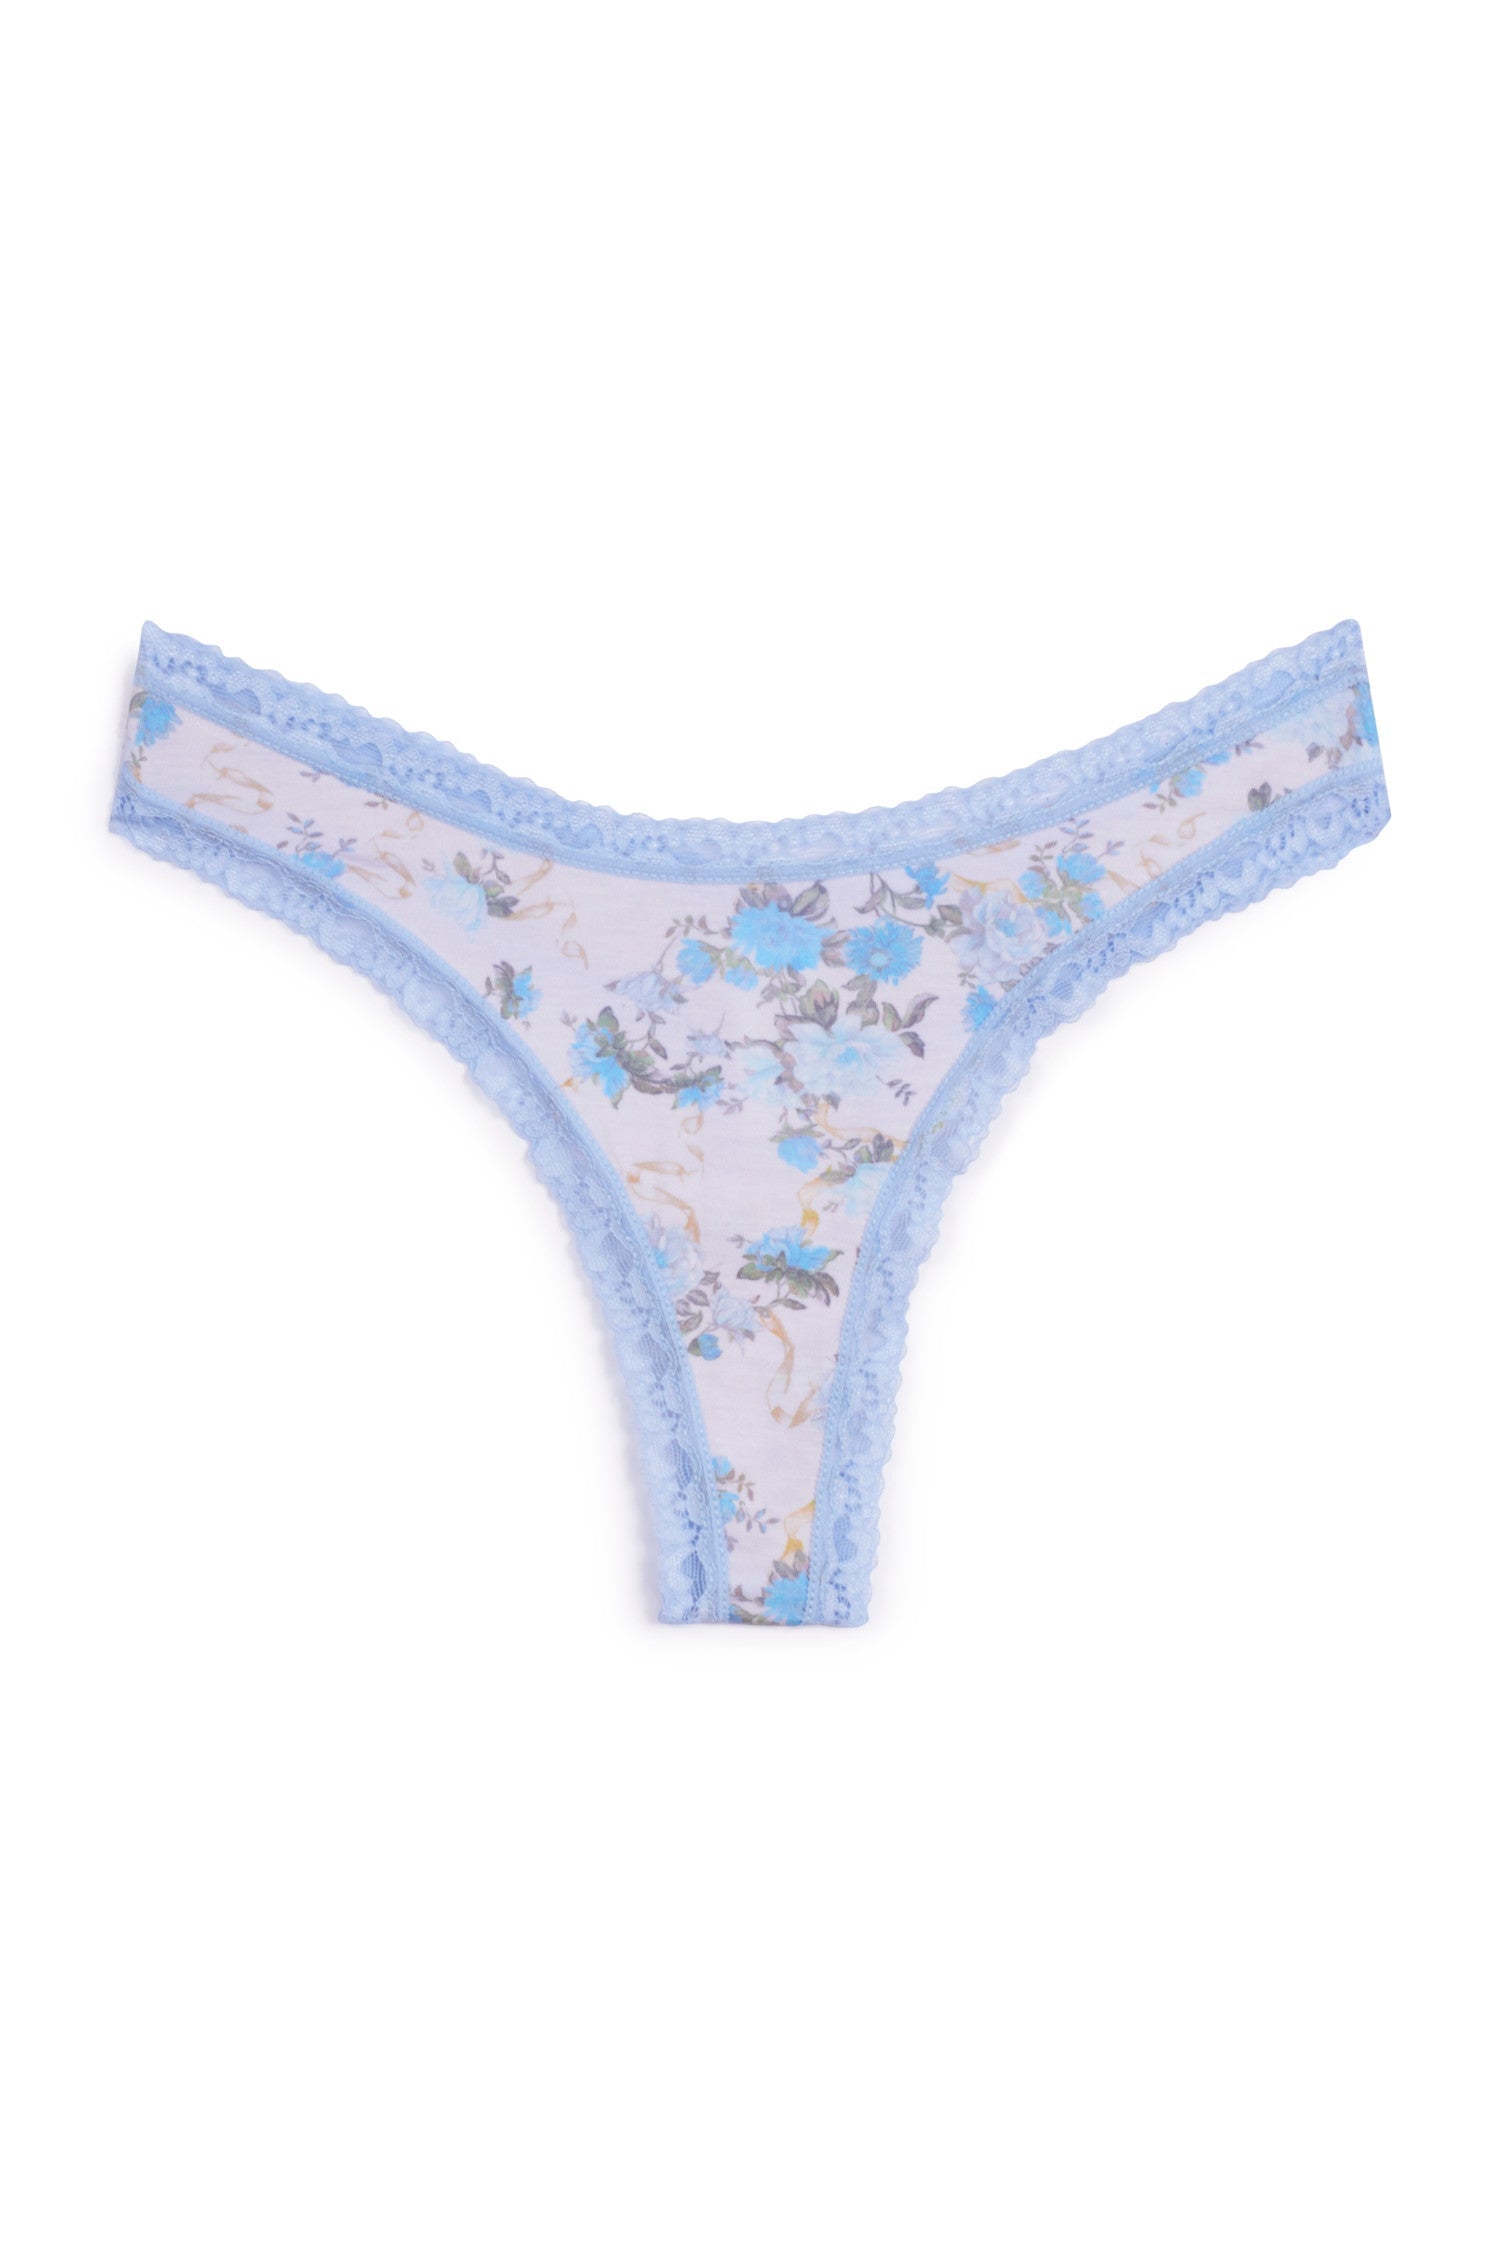 Womens sustainable multi floral lace knicker underwear thong box set